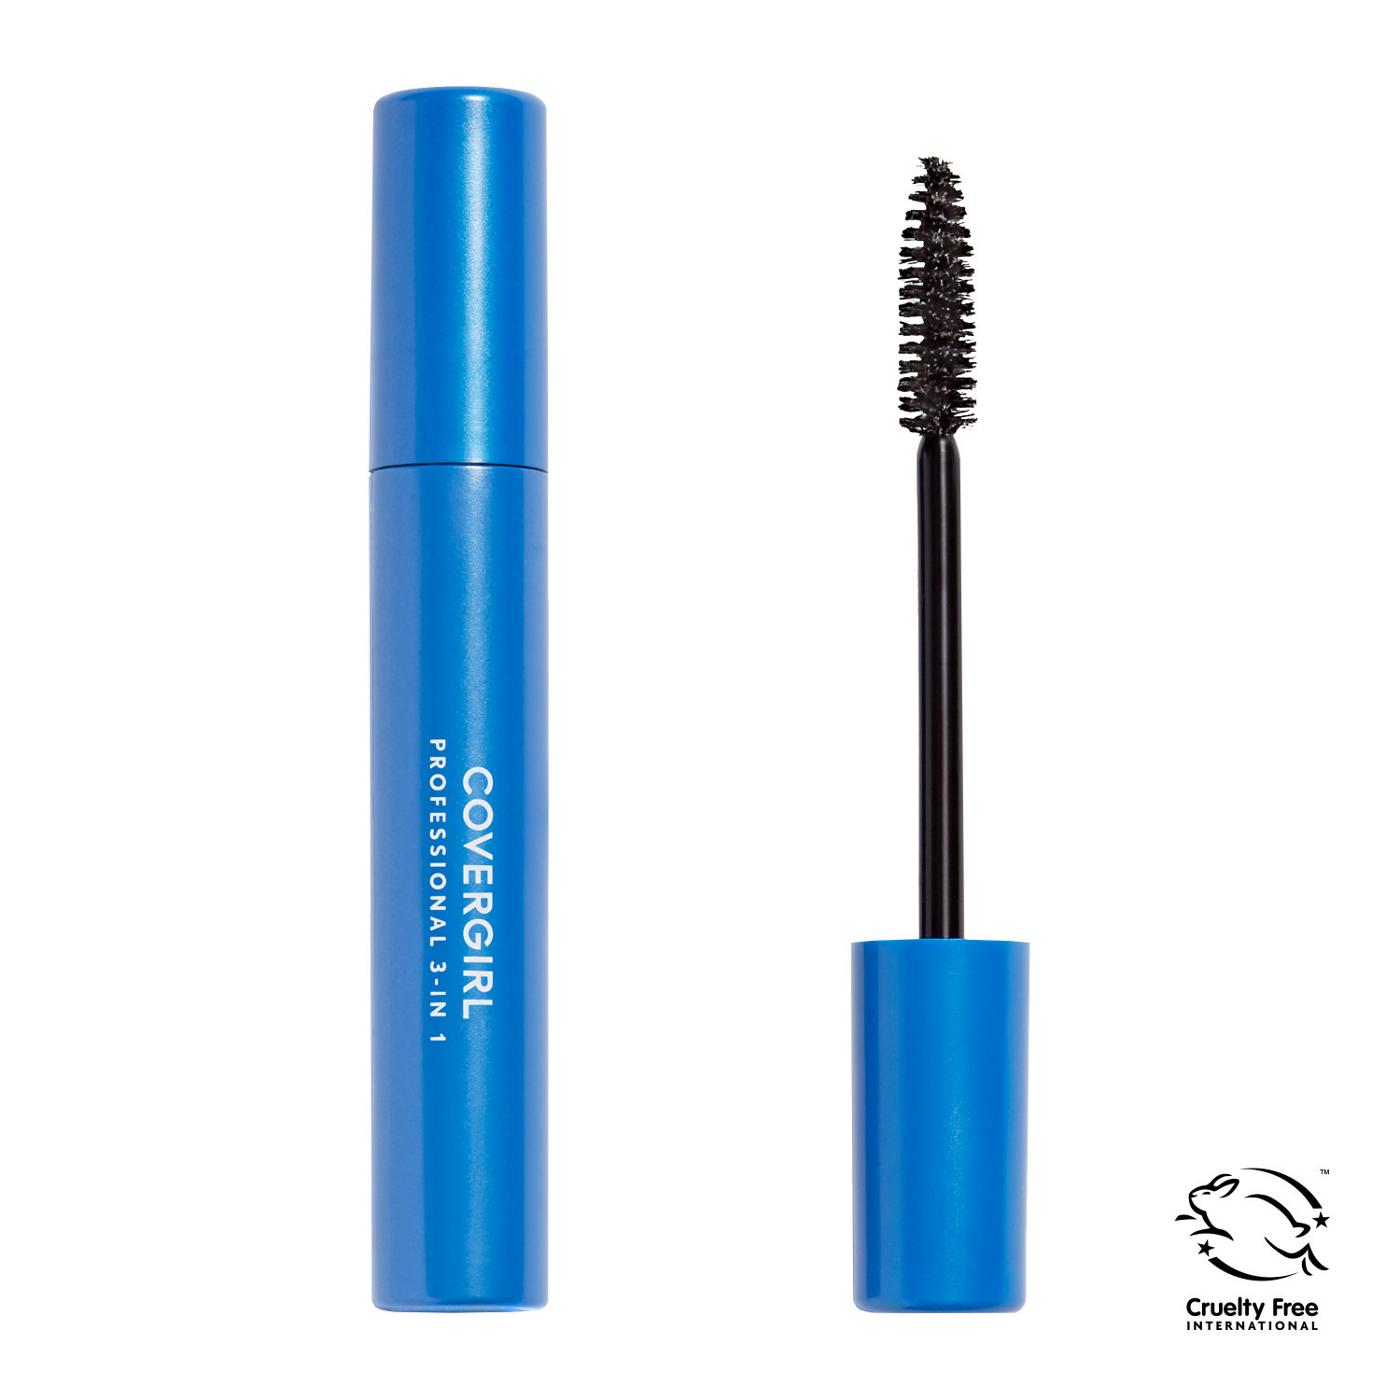 Covergirl Professional 3-in-1 Straight Brush Mascara 200 Very Black; image 5 of 5